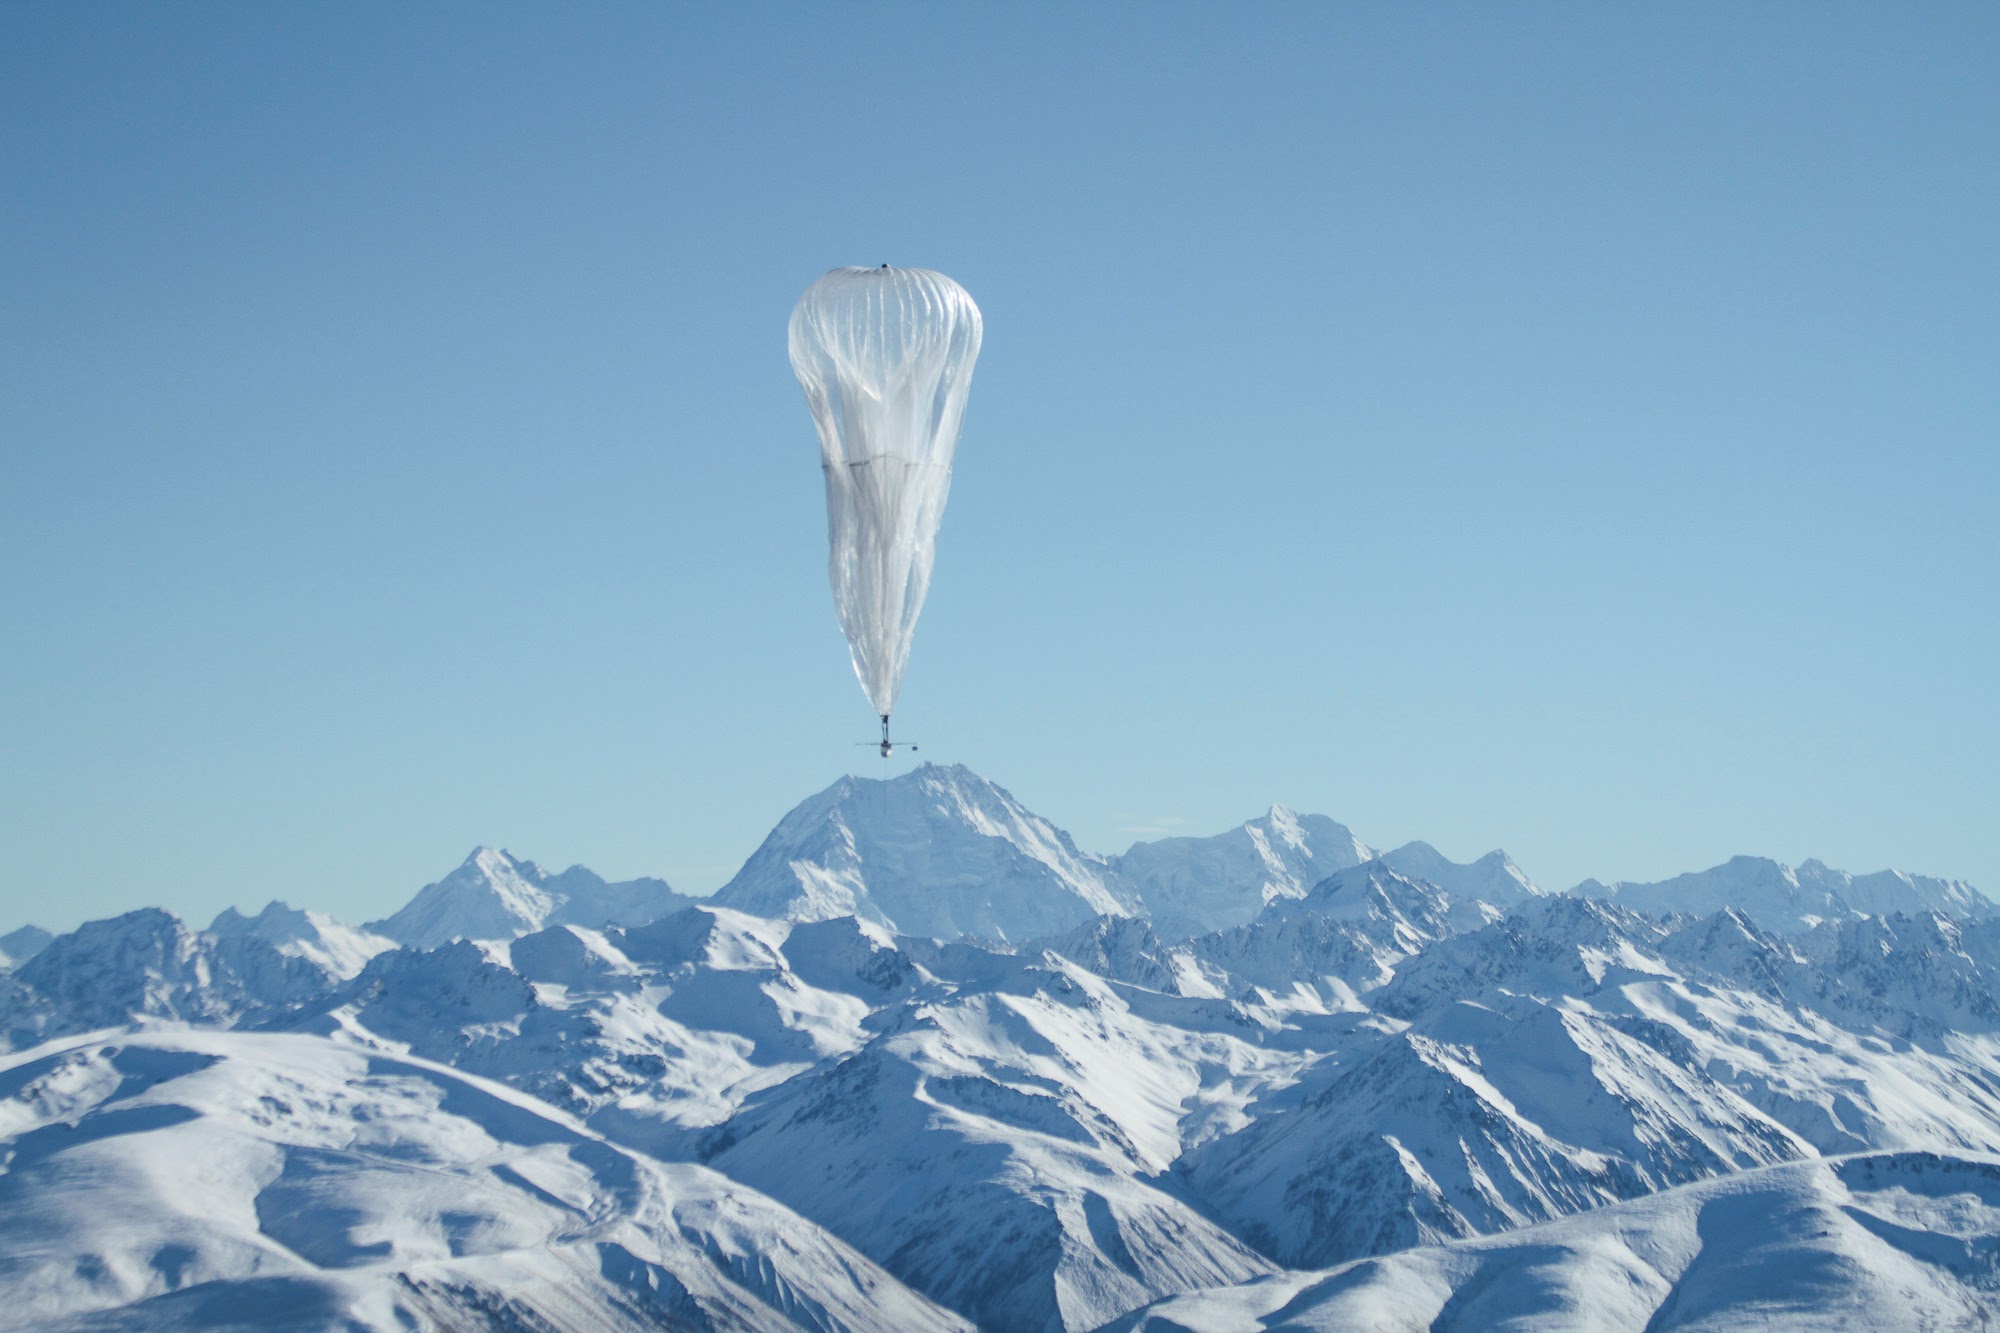 Report: Google to bring its Project Loon to India